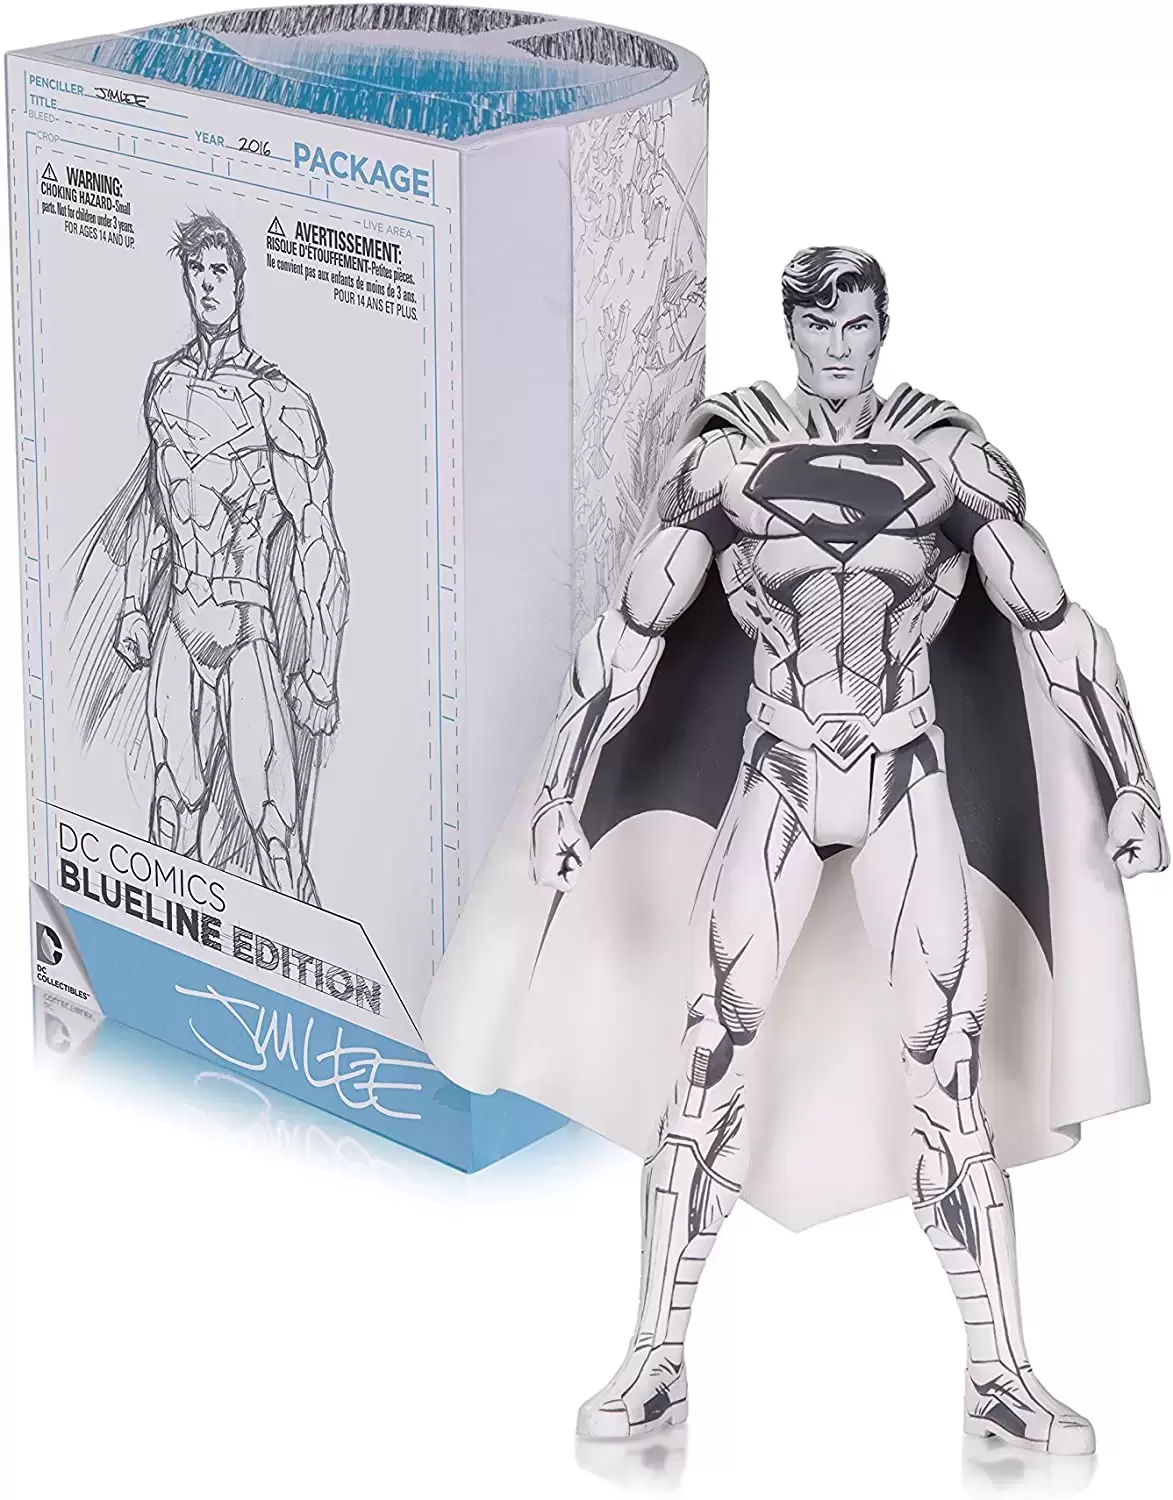 Other DC Collectibles - Blueline Edition - Superman by JIM LEE